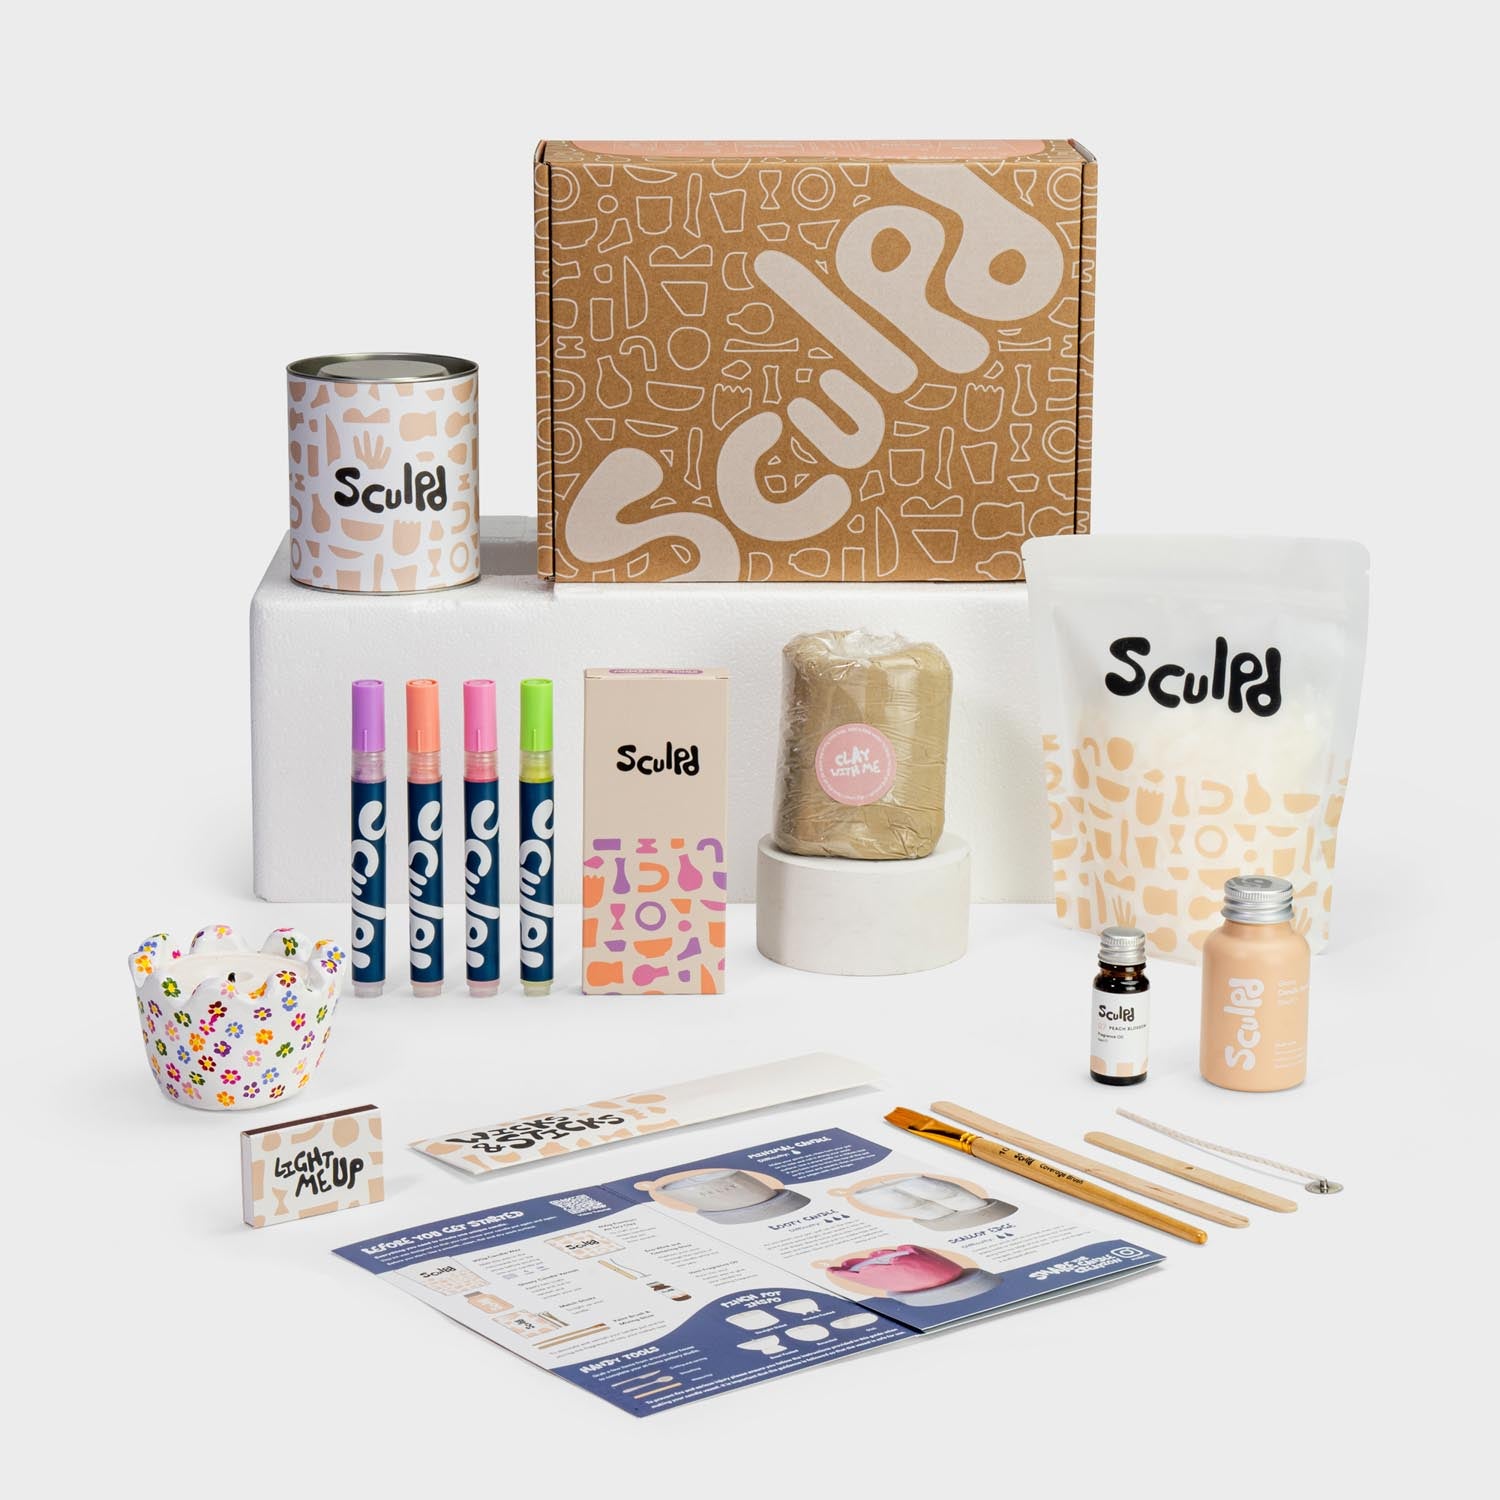 Sculpd Candle Making Kit